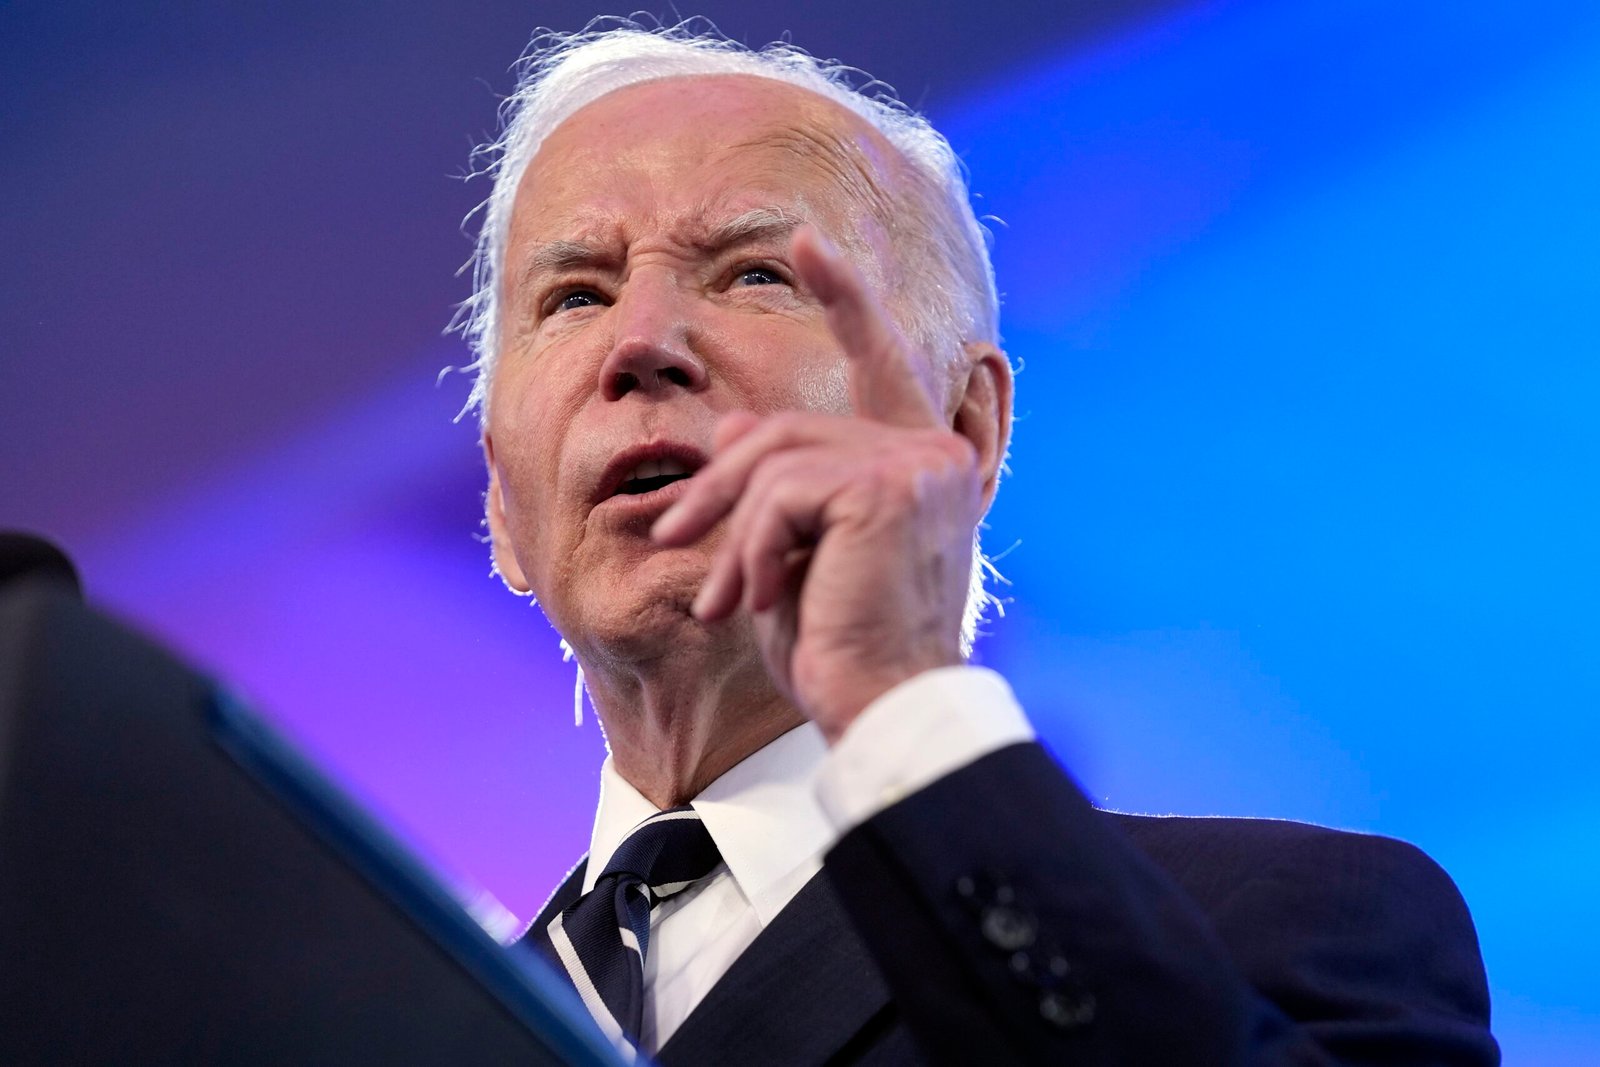 Biden “Completely Not” Pulling Out Of US Presidential Race: White Home